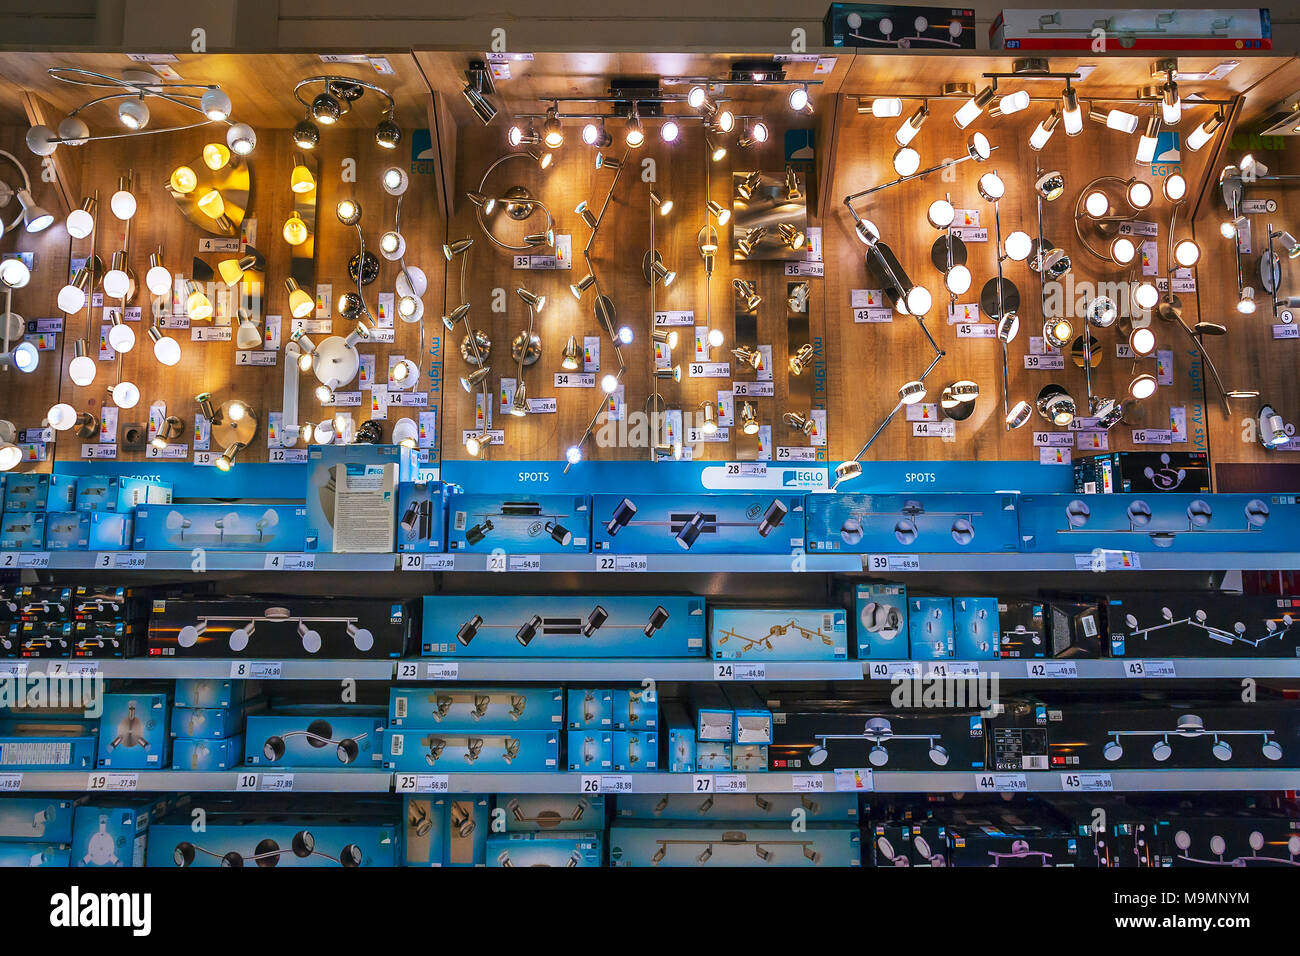 Lamps department, various lamps and lights, hardware store, interior, Bavaria, Germany Stock Photo